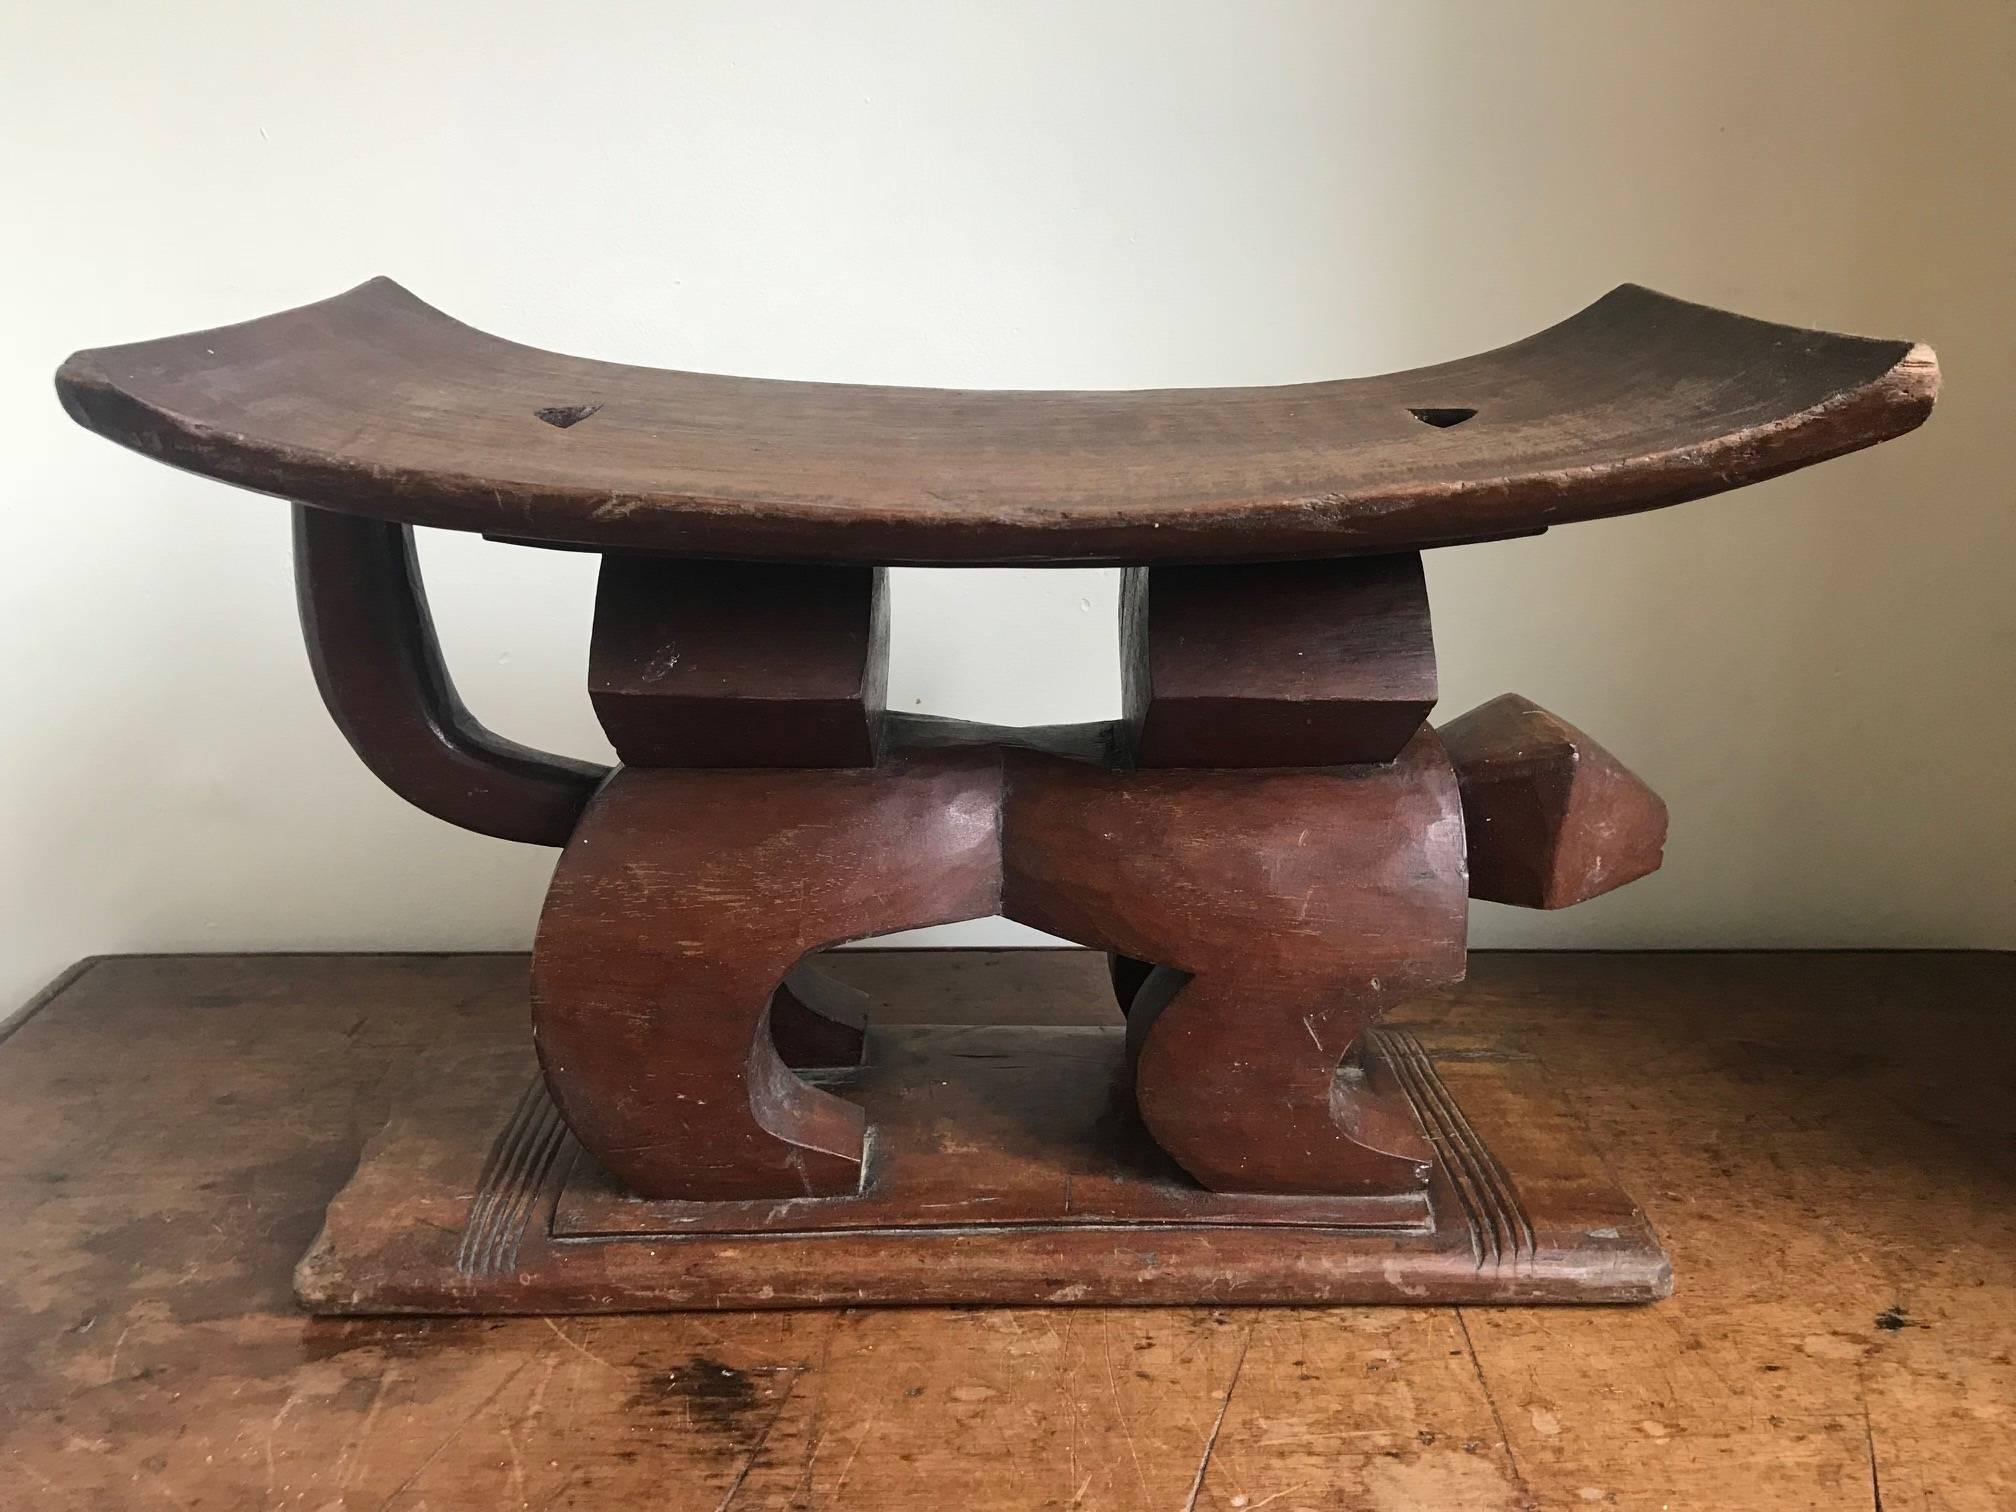 A very interesting African tribal stool. Possibly from the Ashanti tribe featuring an animal as its base carved in a geometric Art Deco style. Some wear and tear, which should be visible in the photos. Original patination.